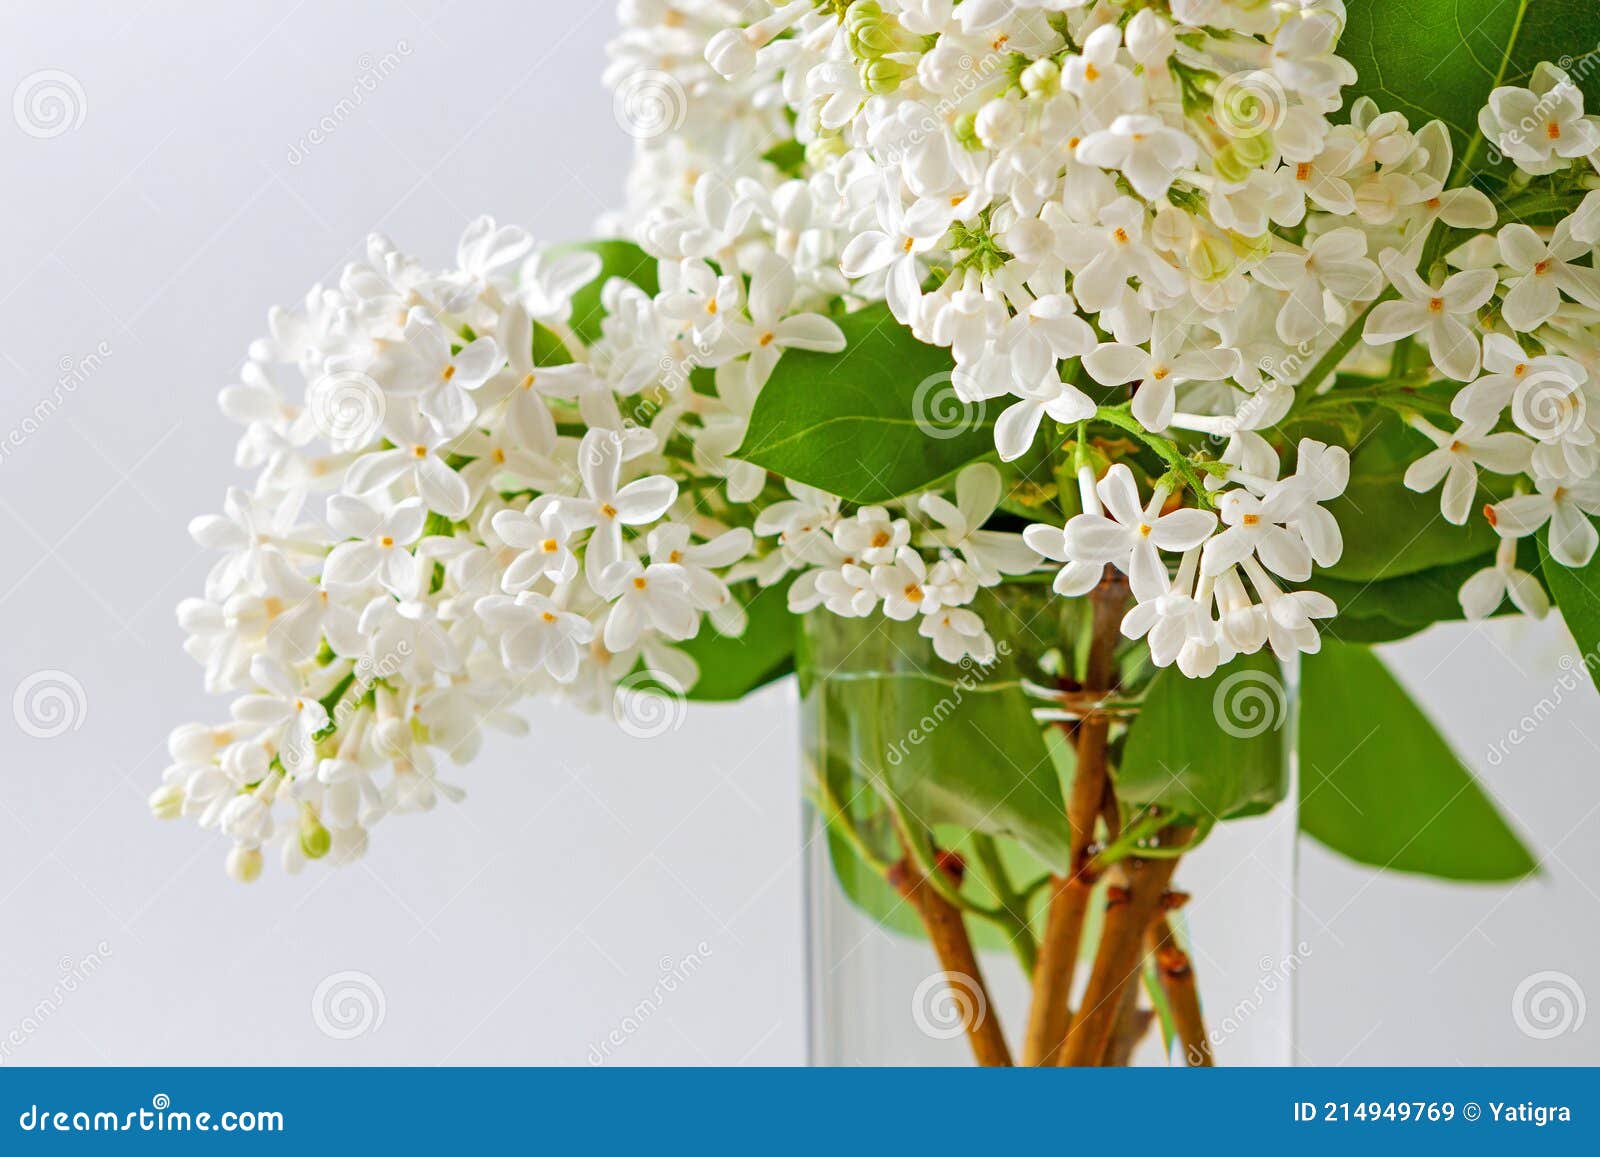 branches of white lilacs are collected in a lush bouquet in a glass vase